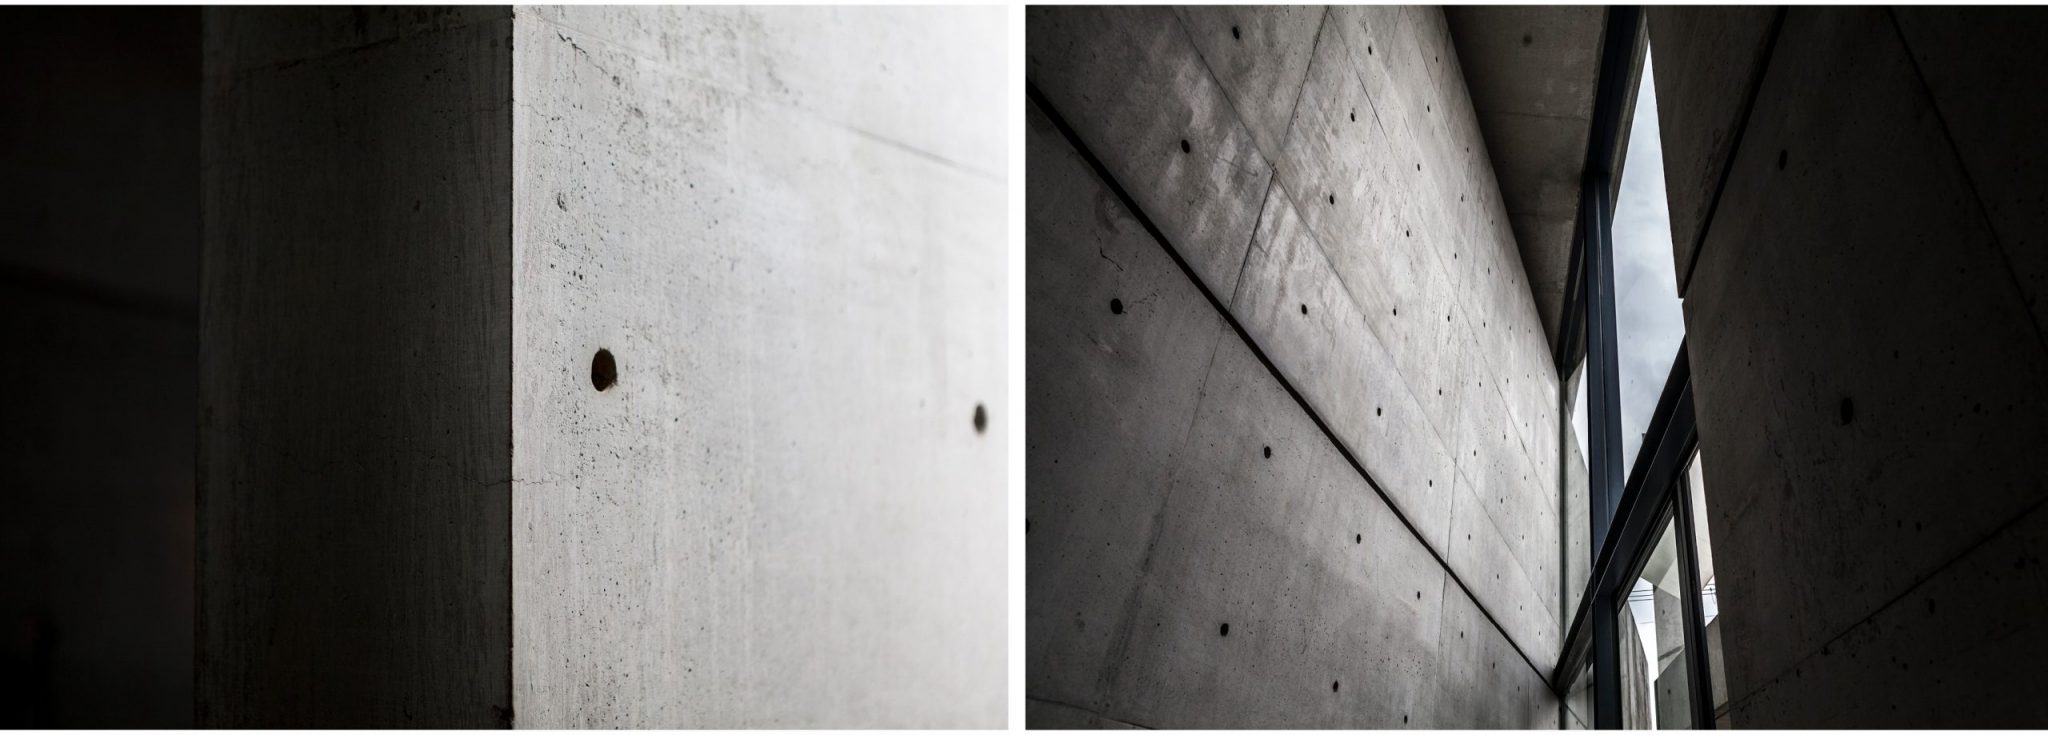 Concrete walls and minimal architecture style